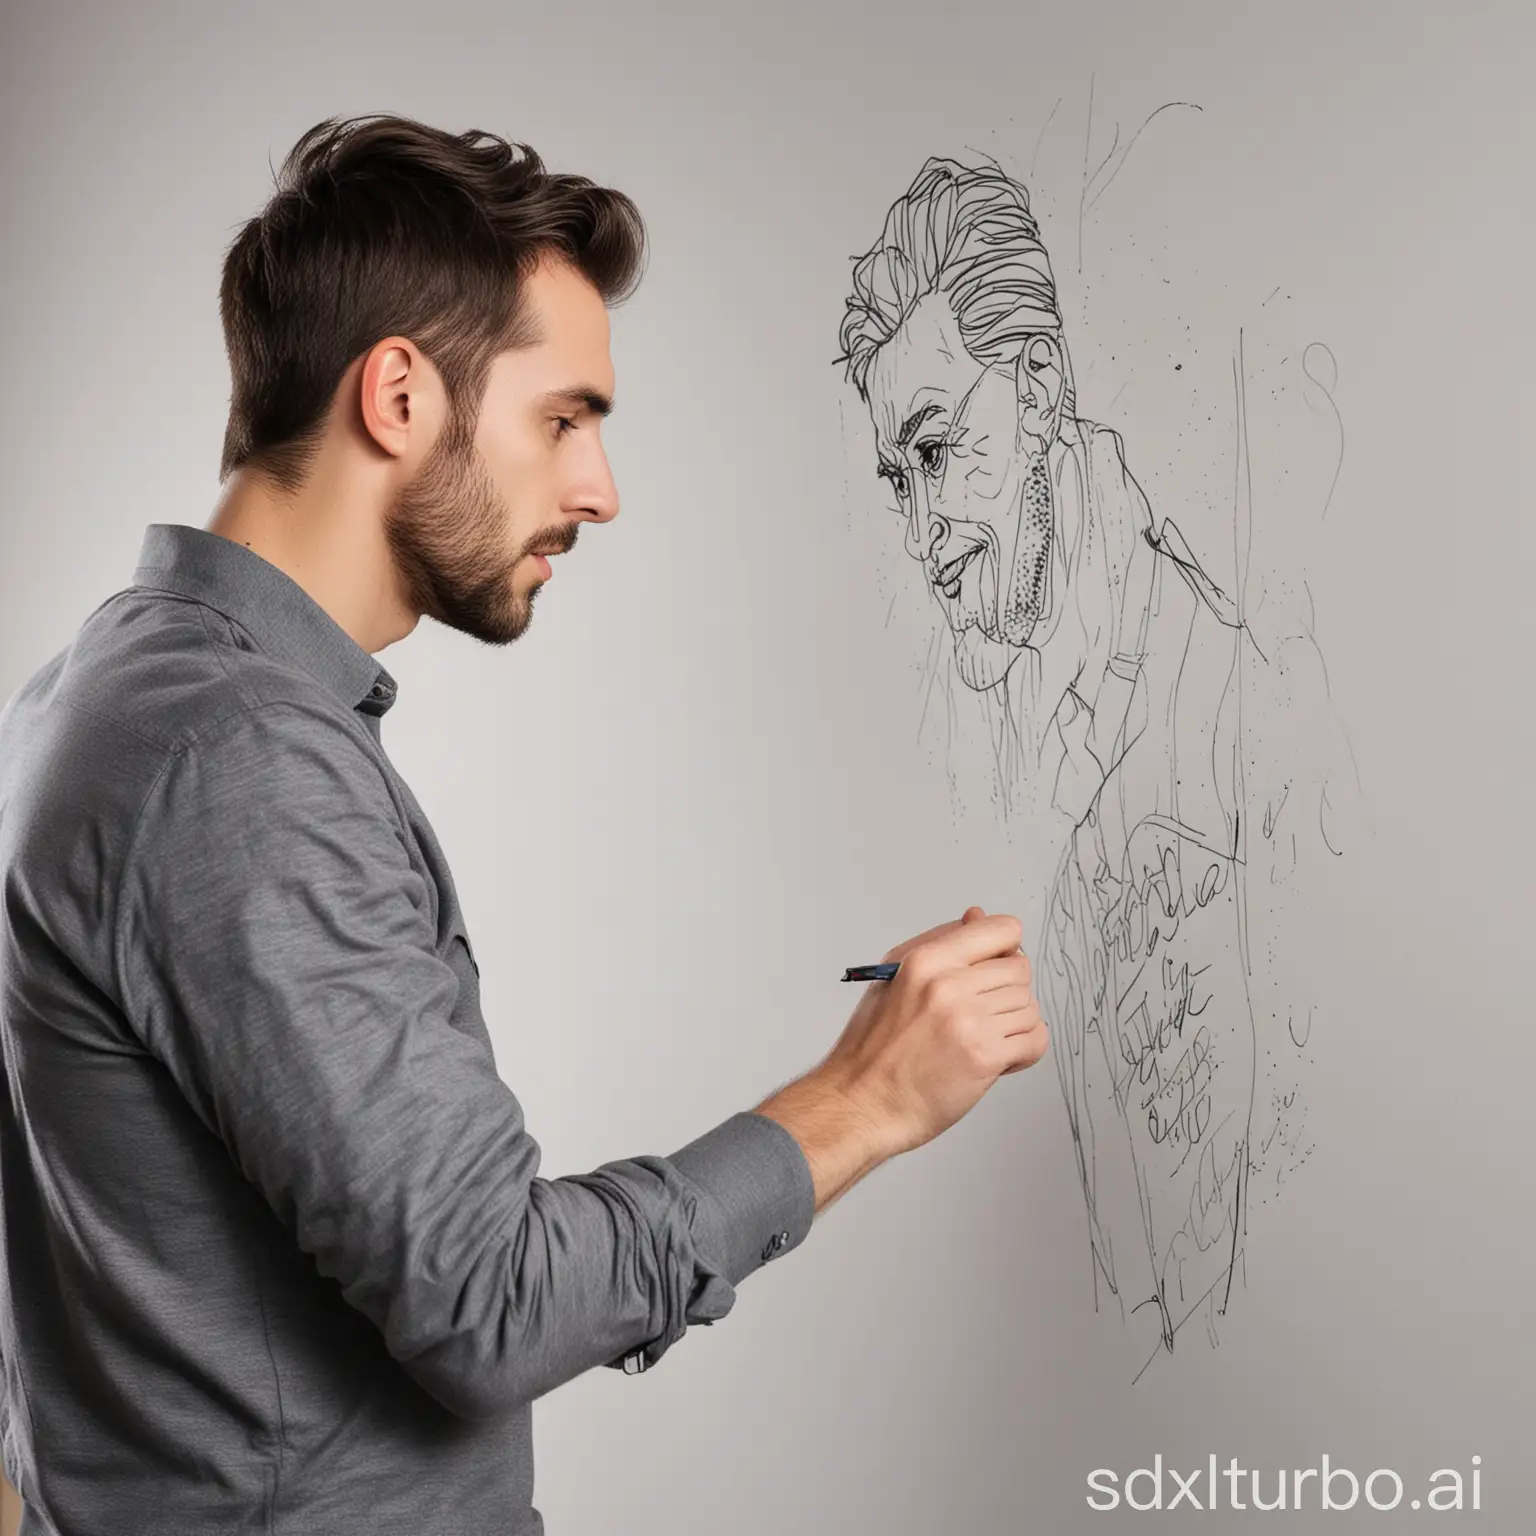 Portrait of a man drawing on the wall writing "Design Office"